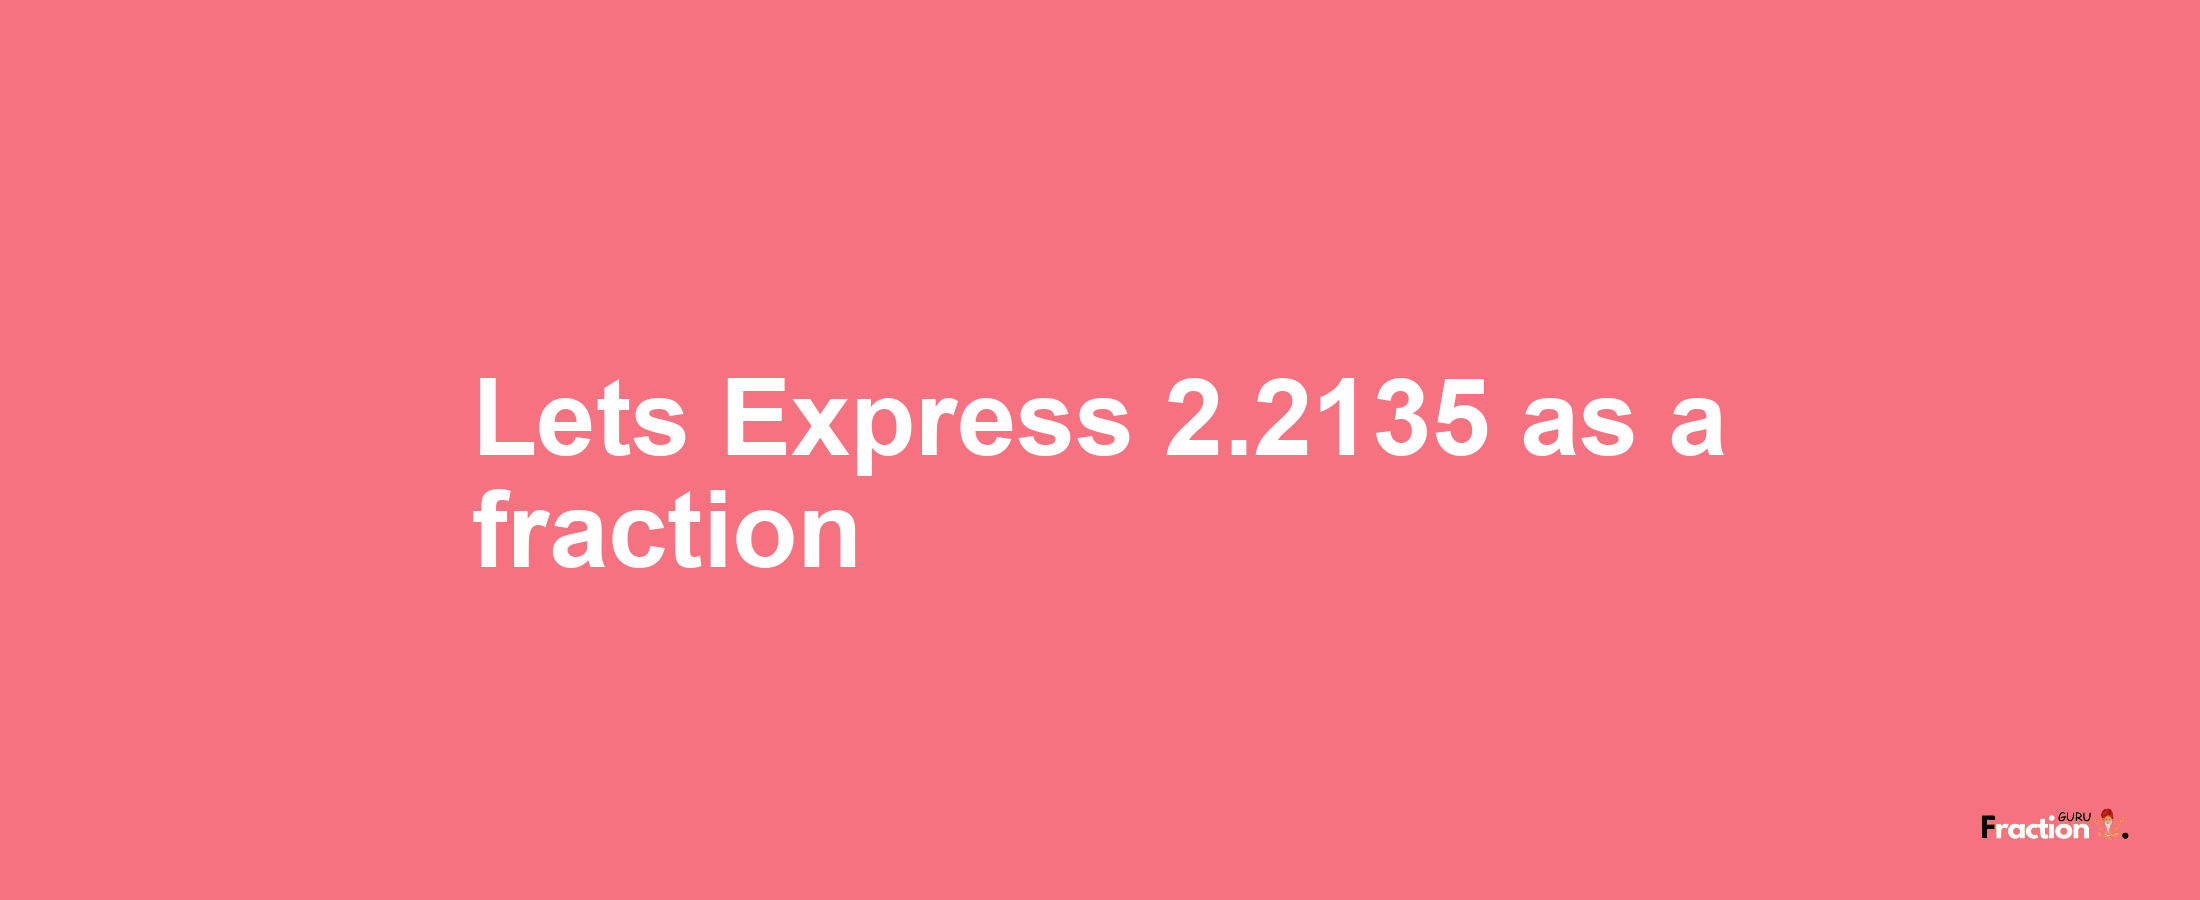 Lets Express 2.2135 as afraction